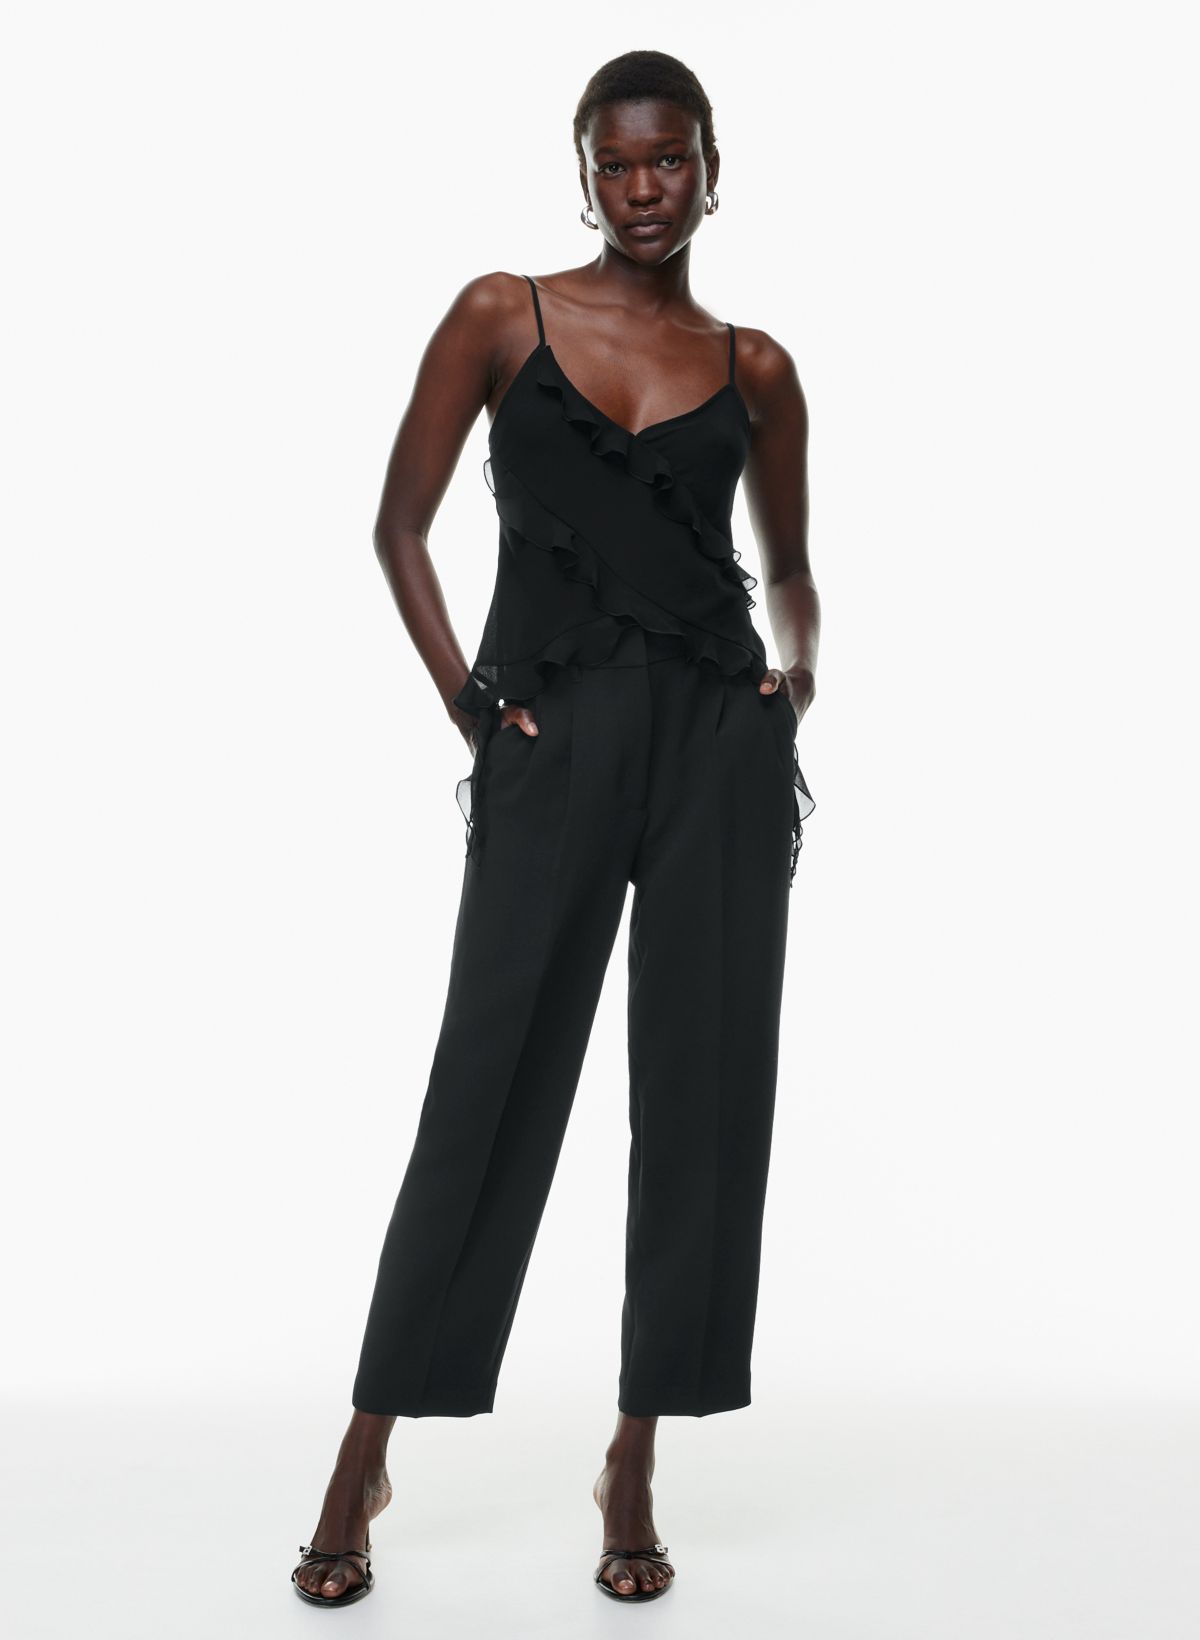 Womens Dress Black Pants - Size 14 - general for sale - by owner